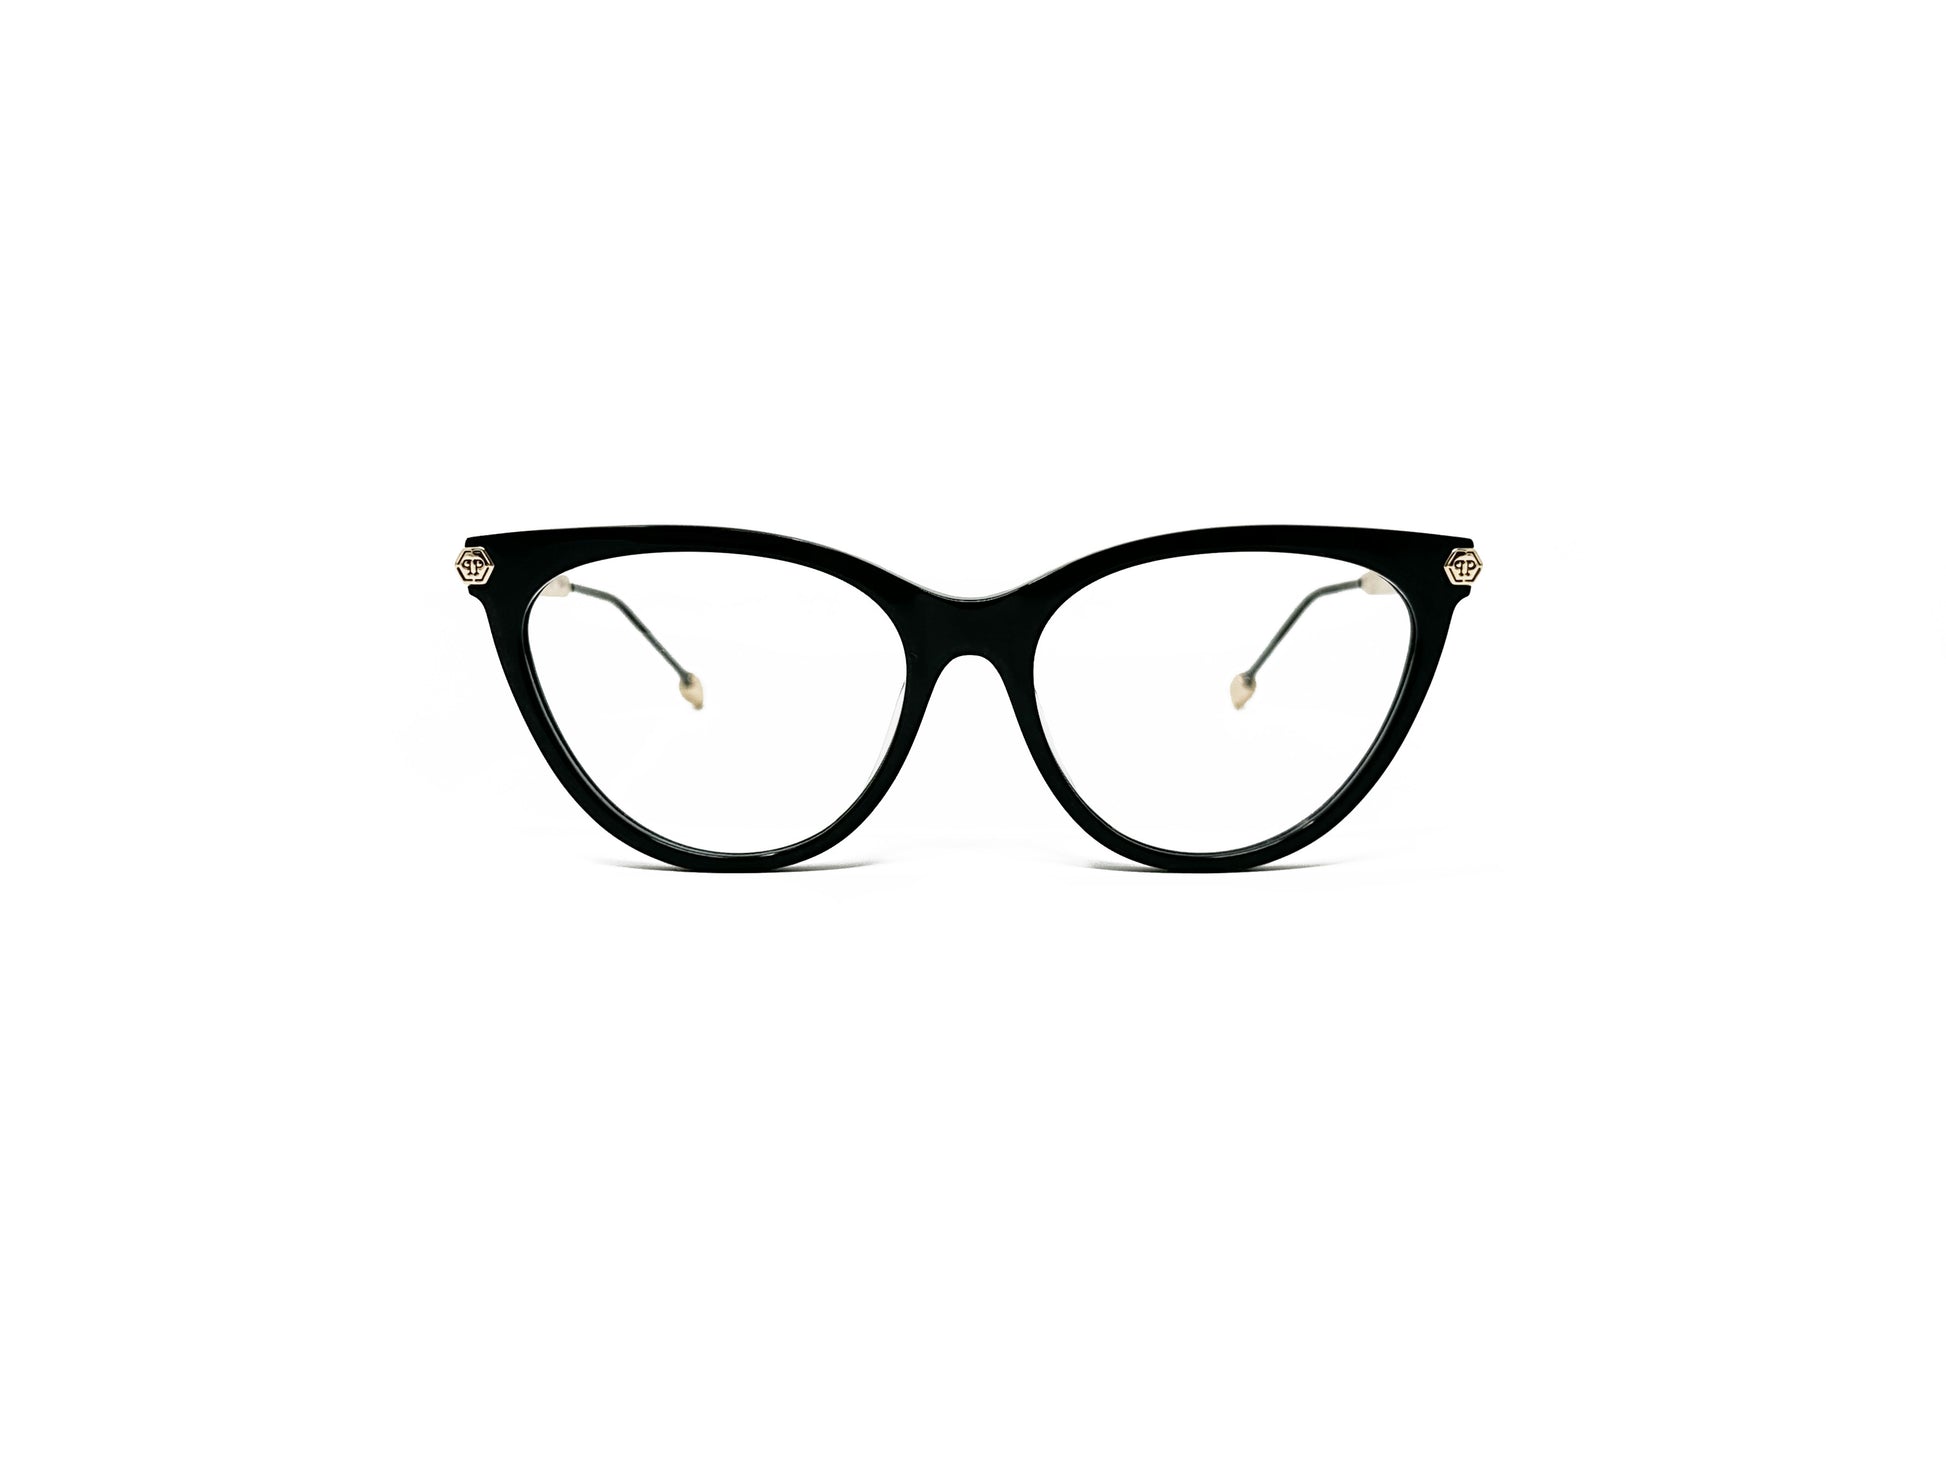 Philipp Plein cat-eye optical frame. Model: VPP037S Flawless. Color: 0700 Black with gold accents. Front view.